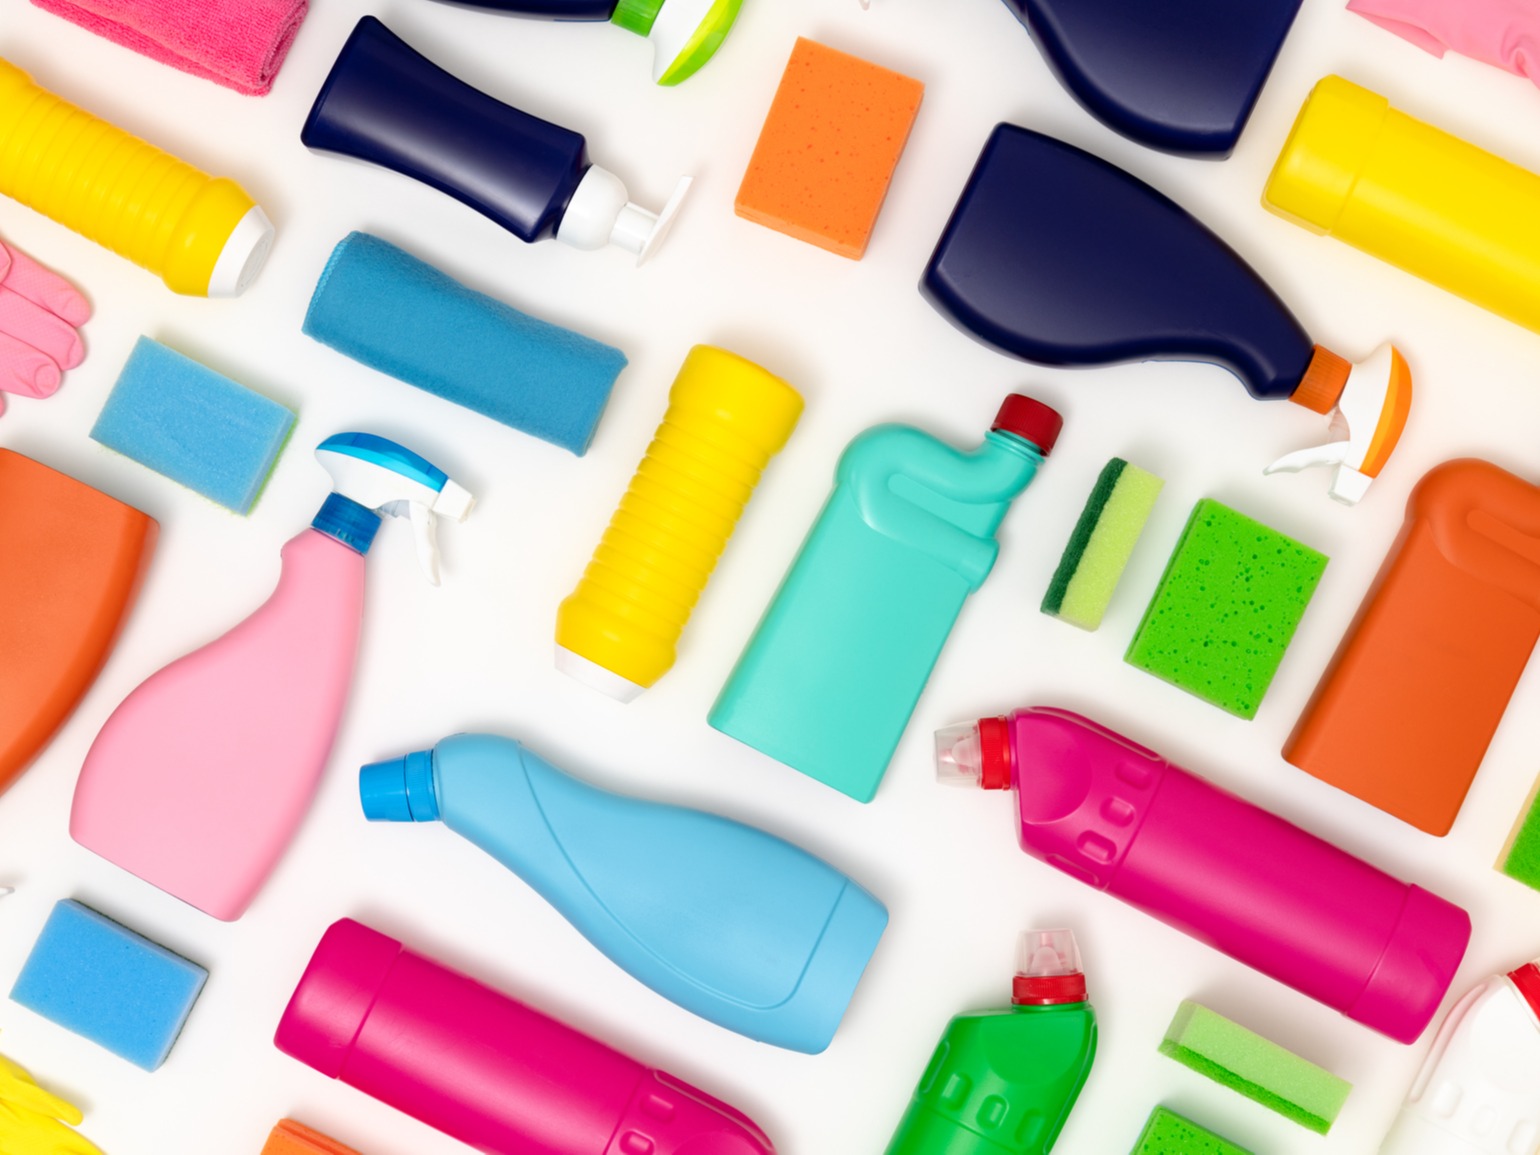 Several colorful spray and pour bottles lying in diagonals next to each other on white background with sponges in between